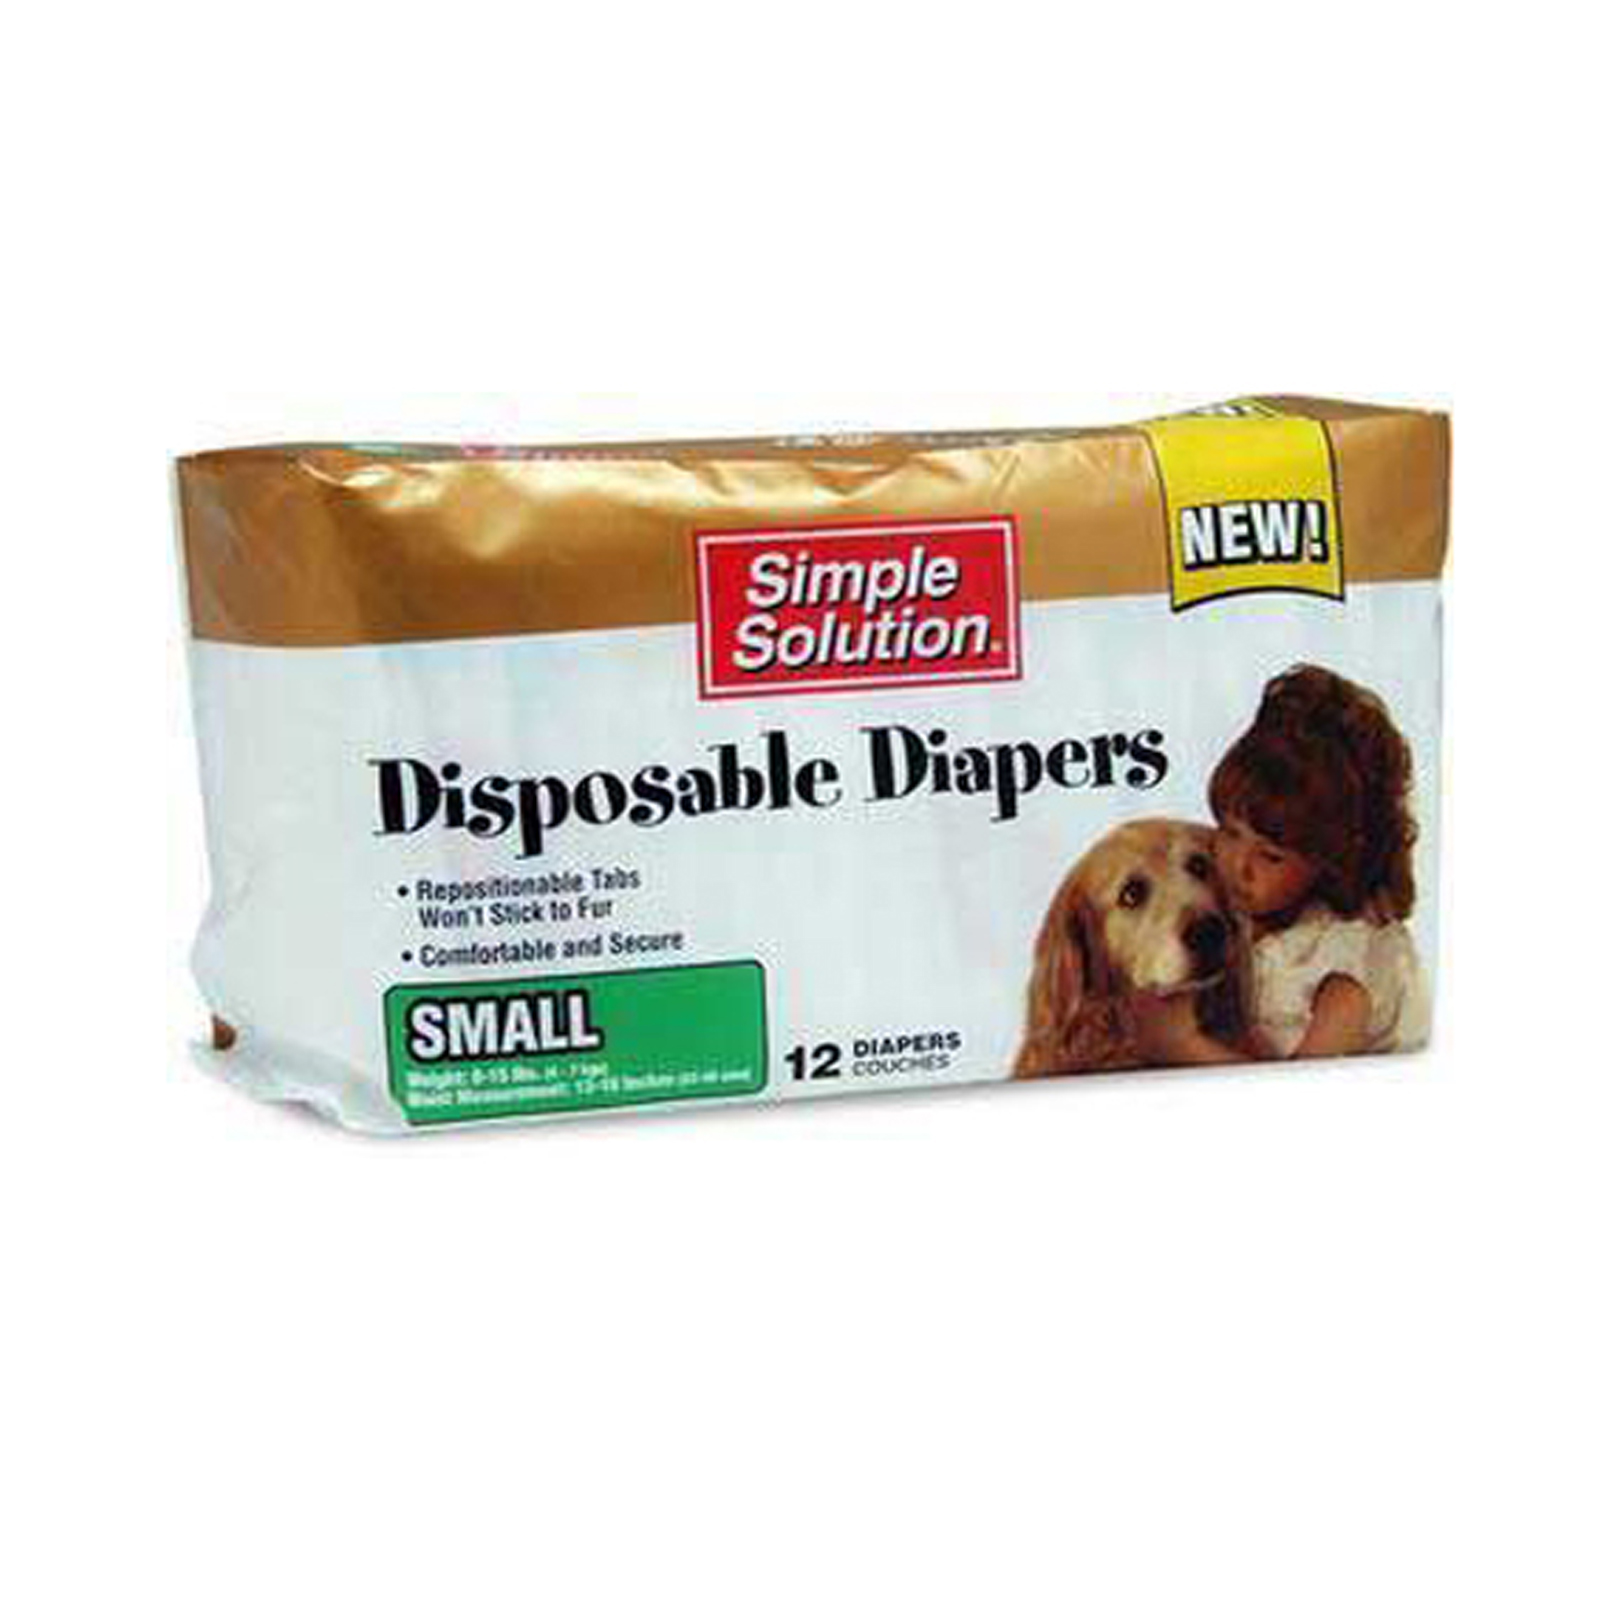 puppy nappies kmart